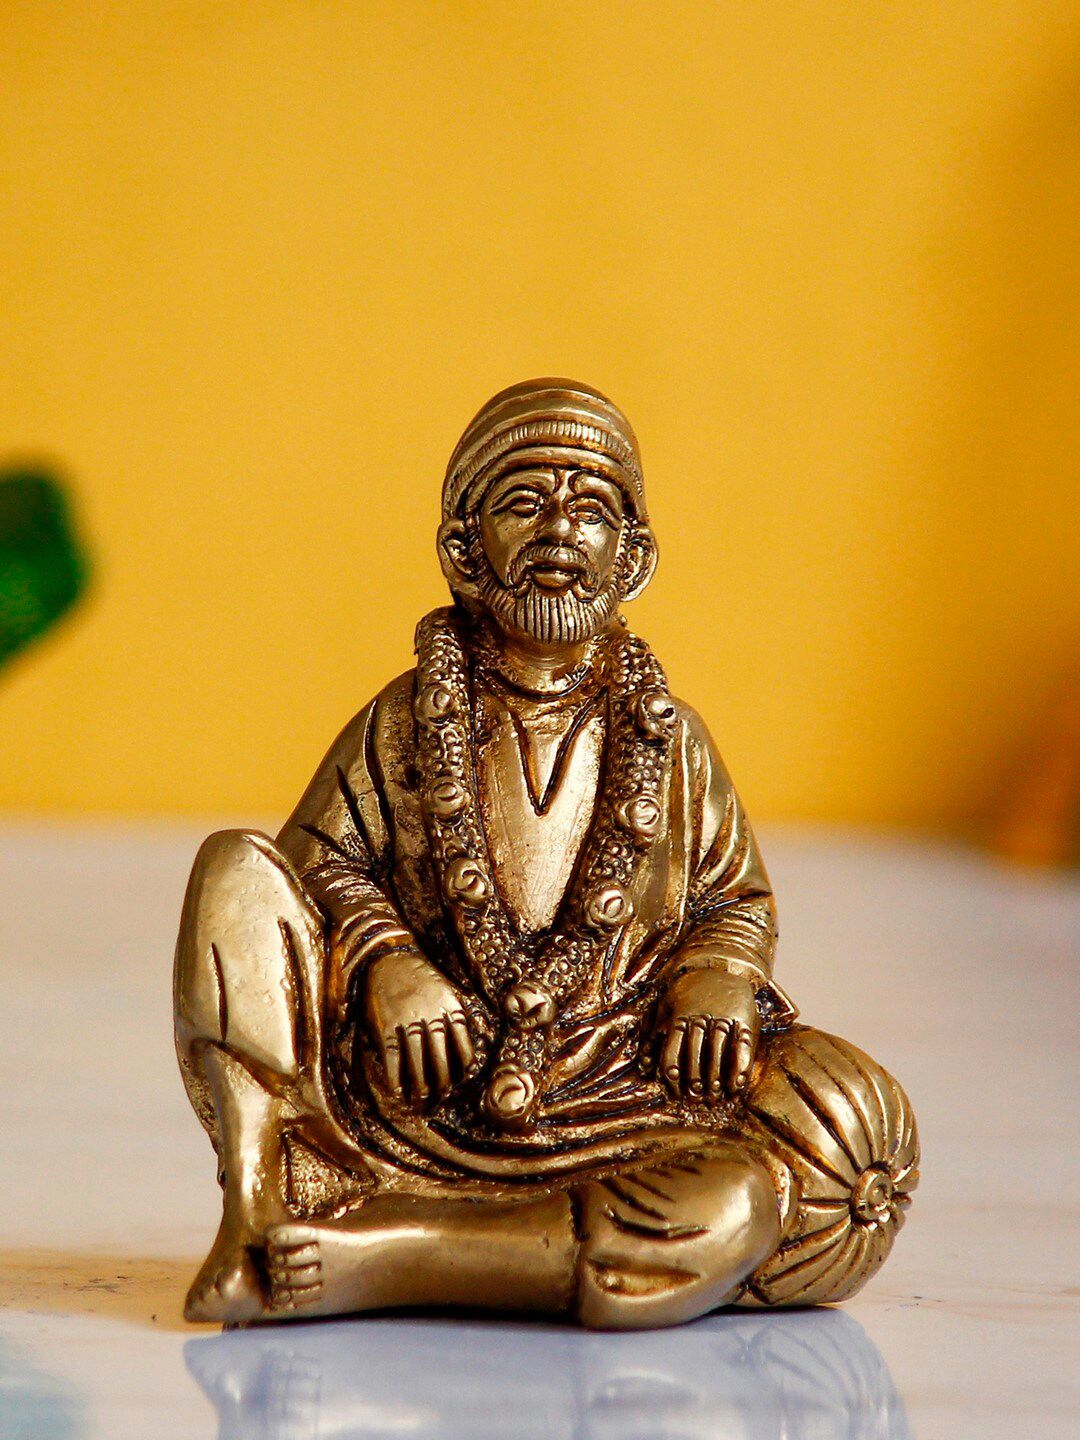 eCraftIndia Gold-Toned Handcrafted Sitting Sai Baba Figurine Showpiece Price in India